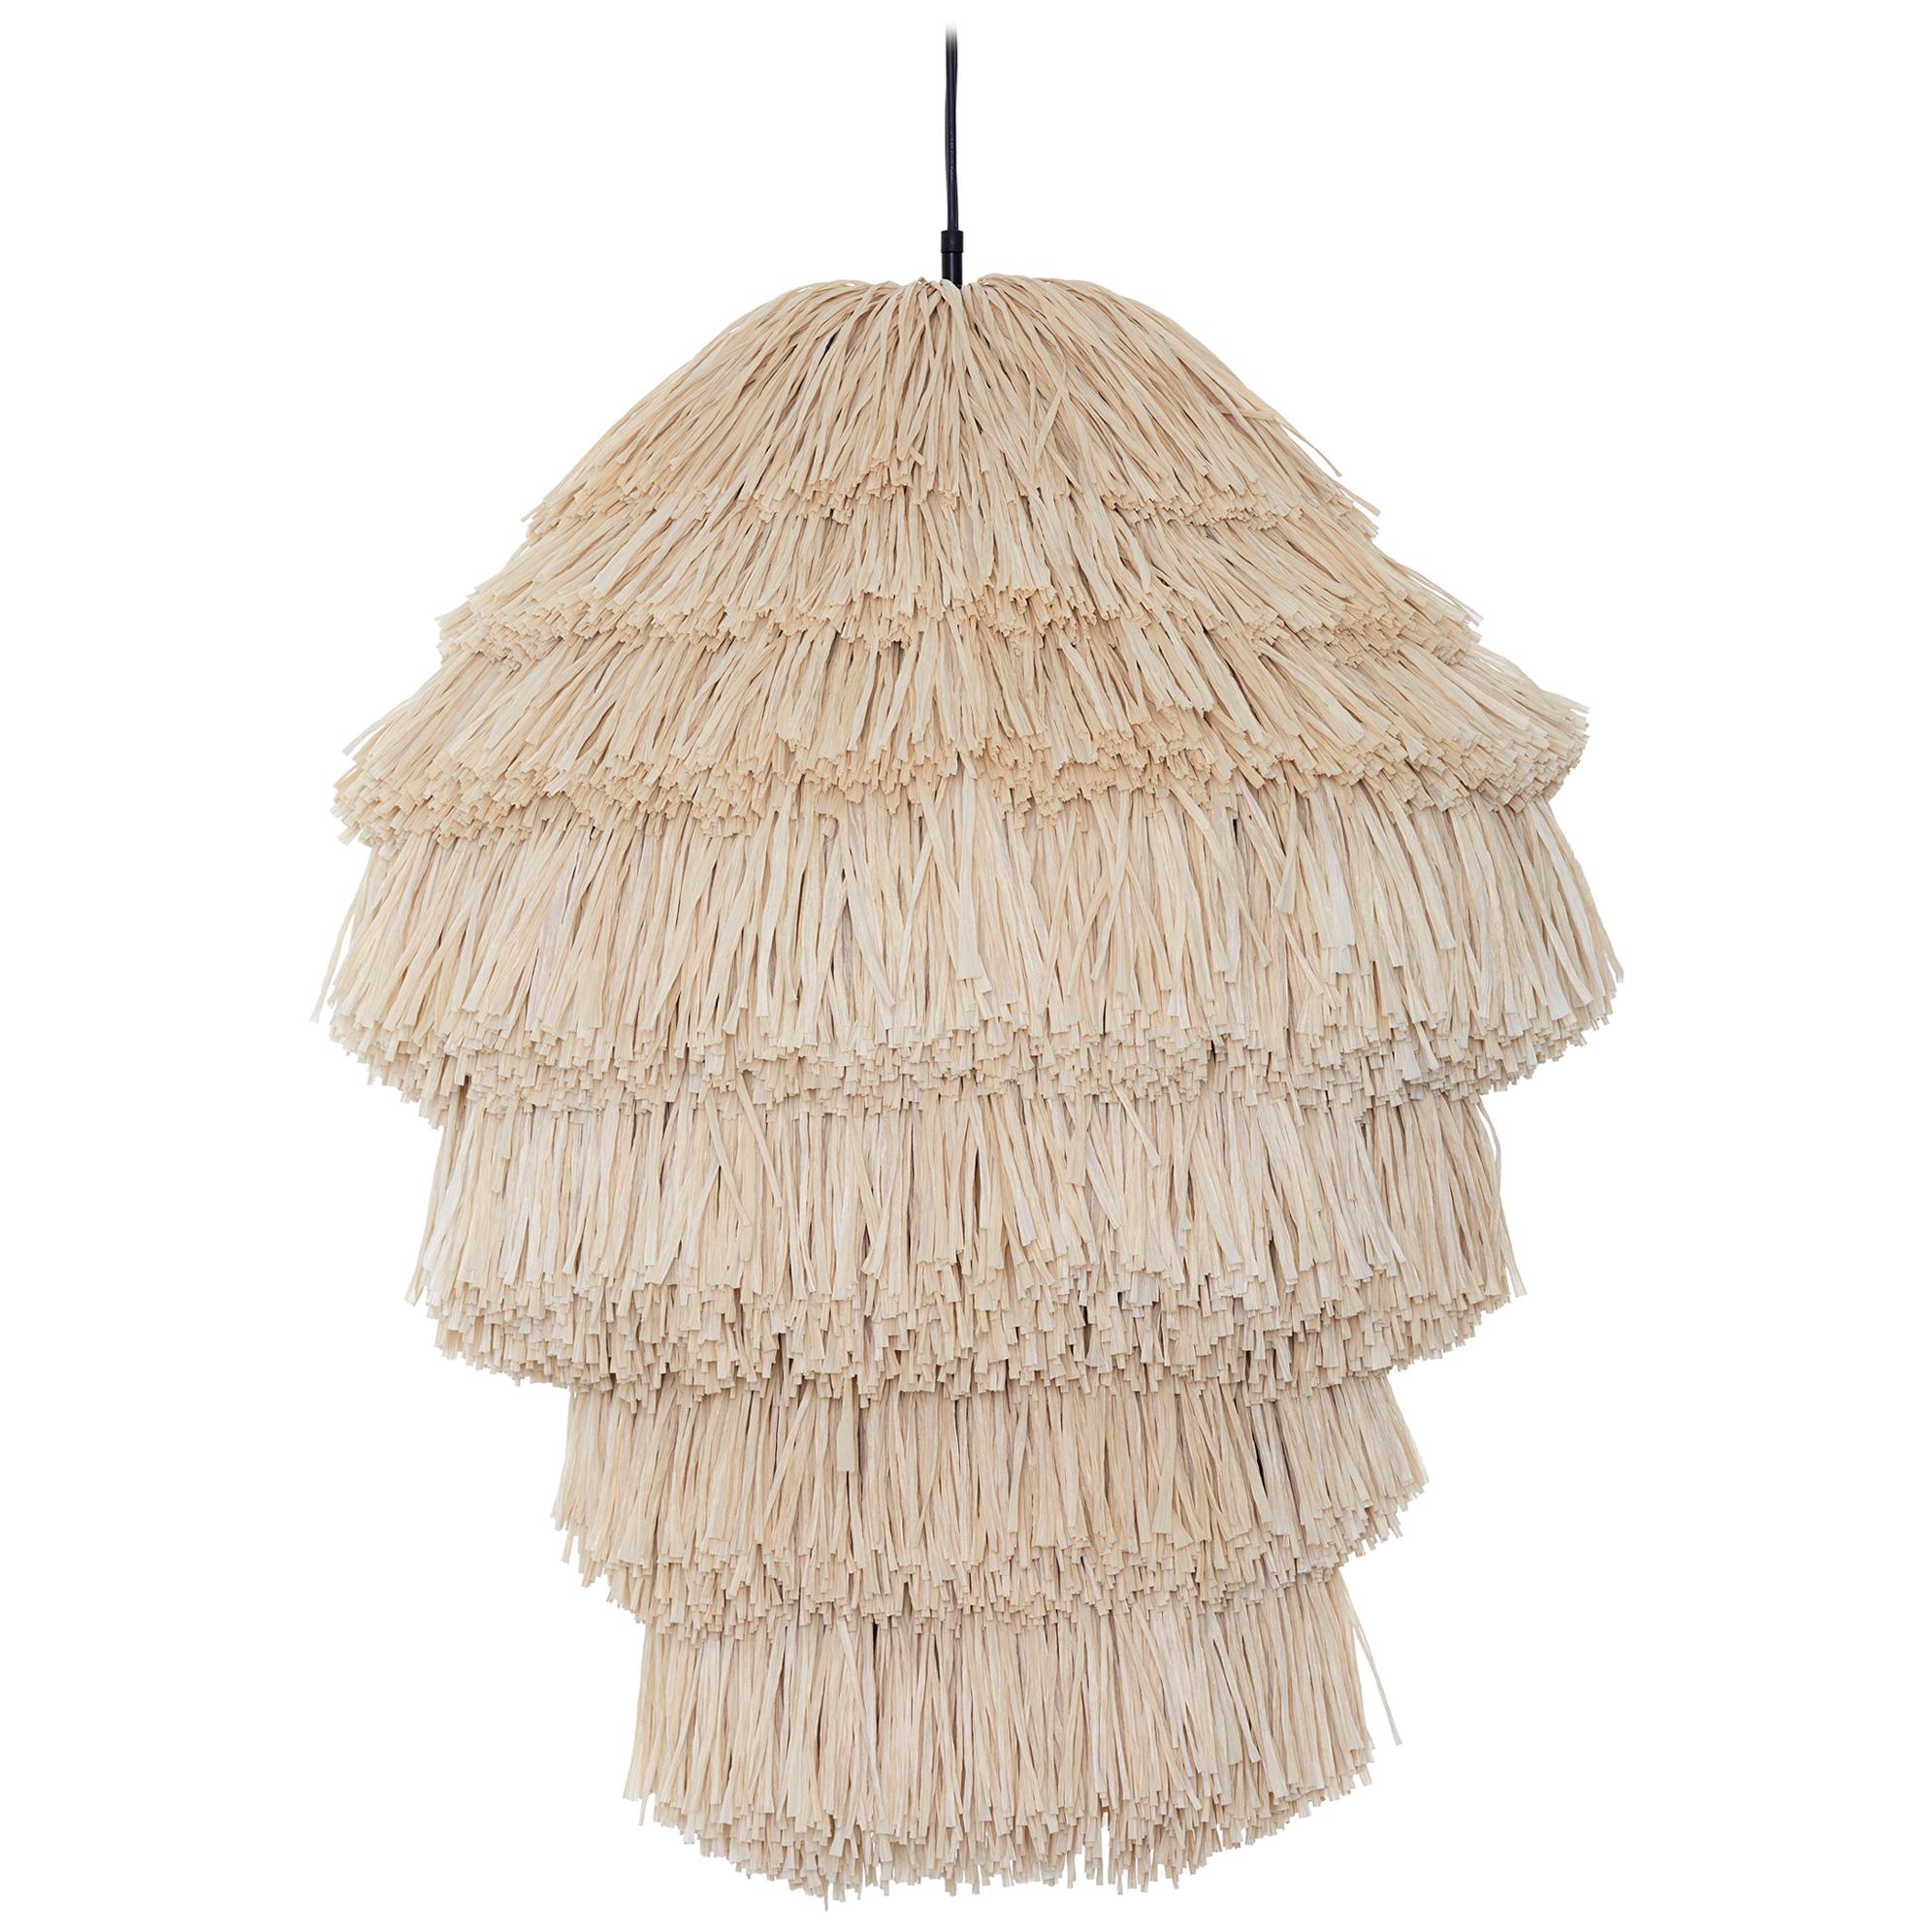 Fran AS Contemporary suspended Light in Raffia, Copper and Steel